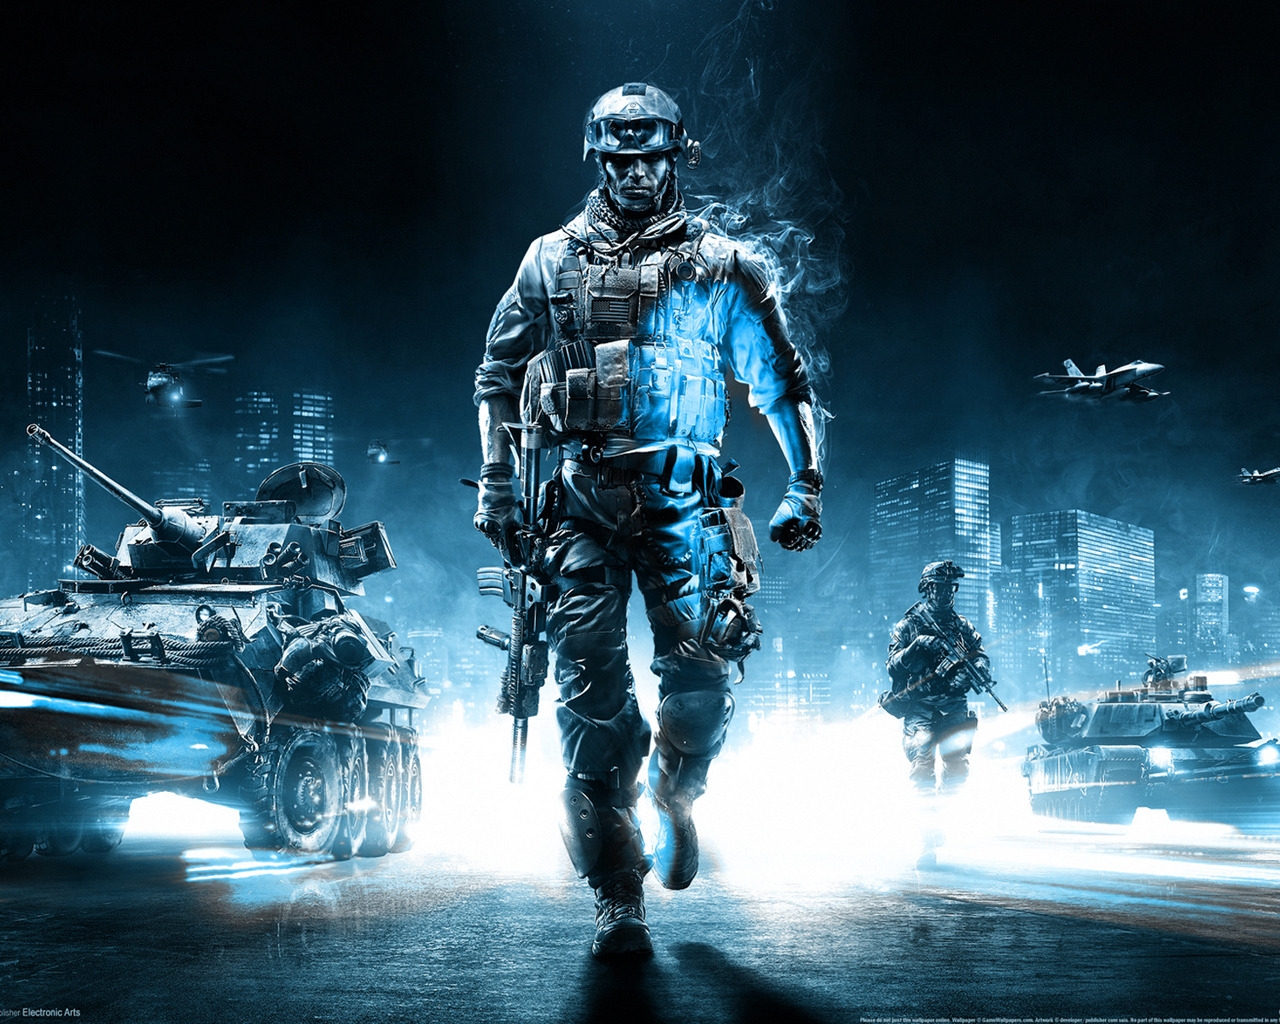 Battlefield 3 Action Game for 1280 x 1024 resolution